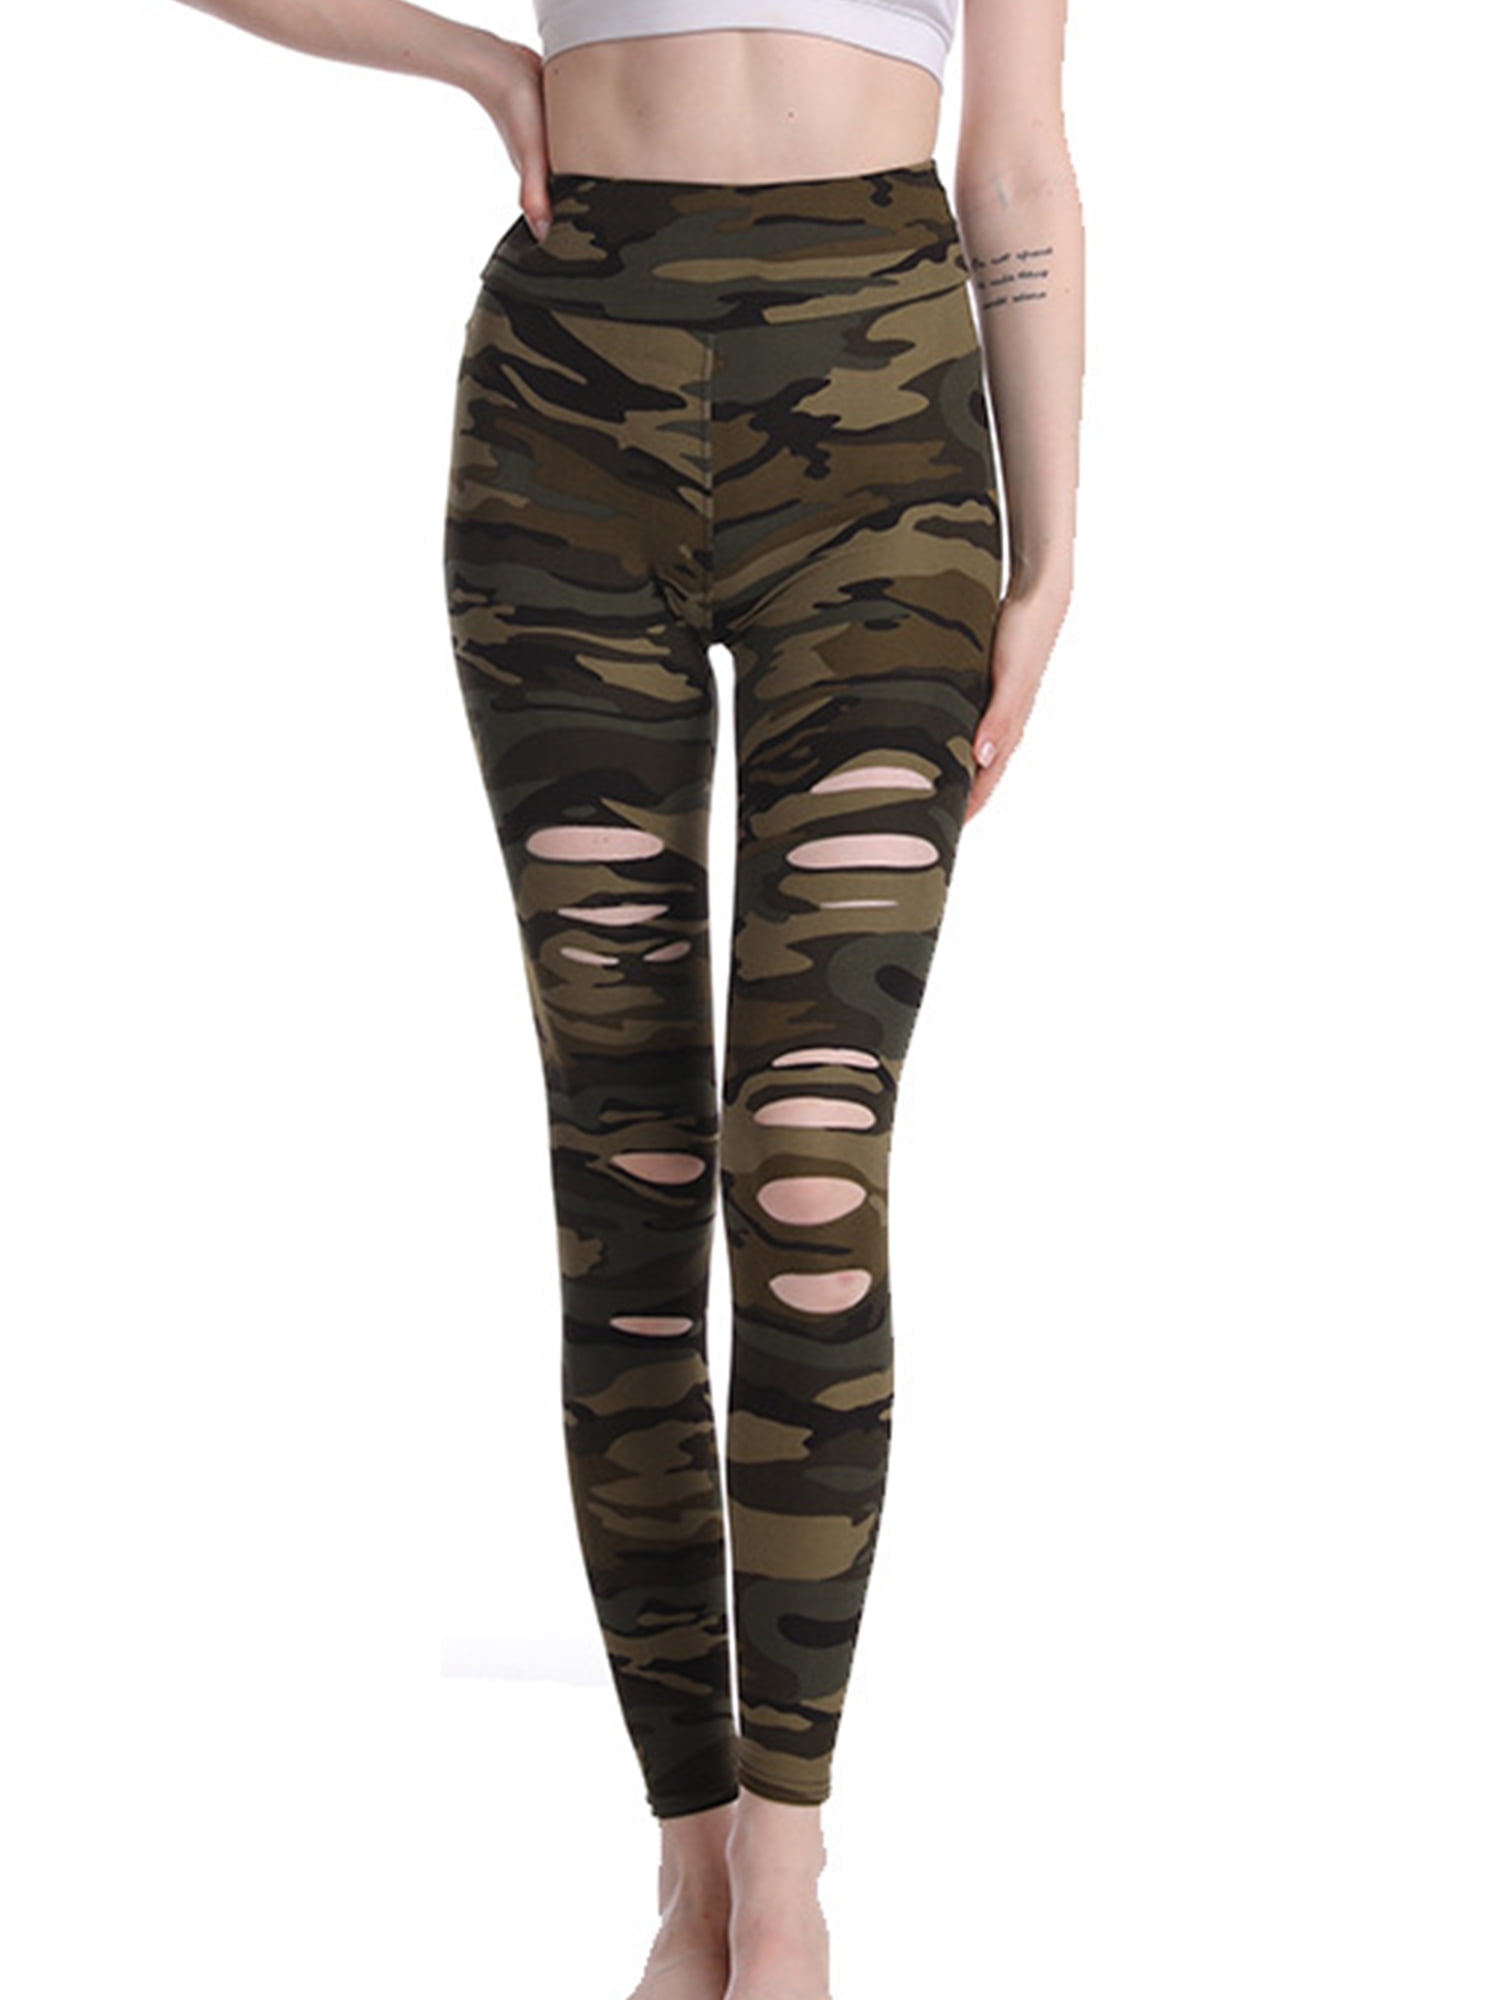 Womens High Waisted Yoga Pants Unique Stretch Leggings Workout Capris Camo-Camouflage 